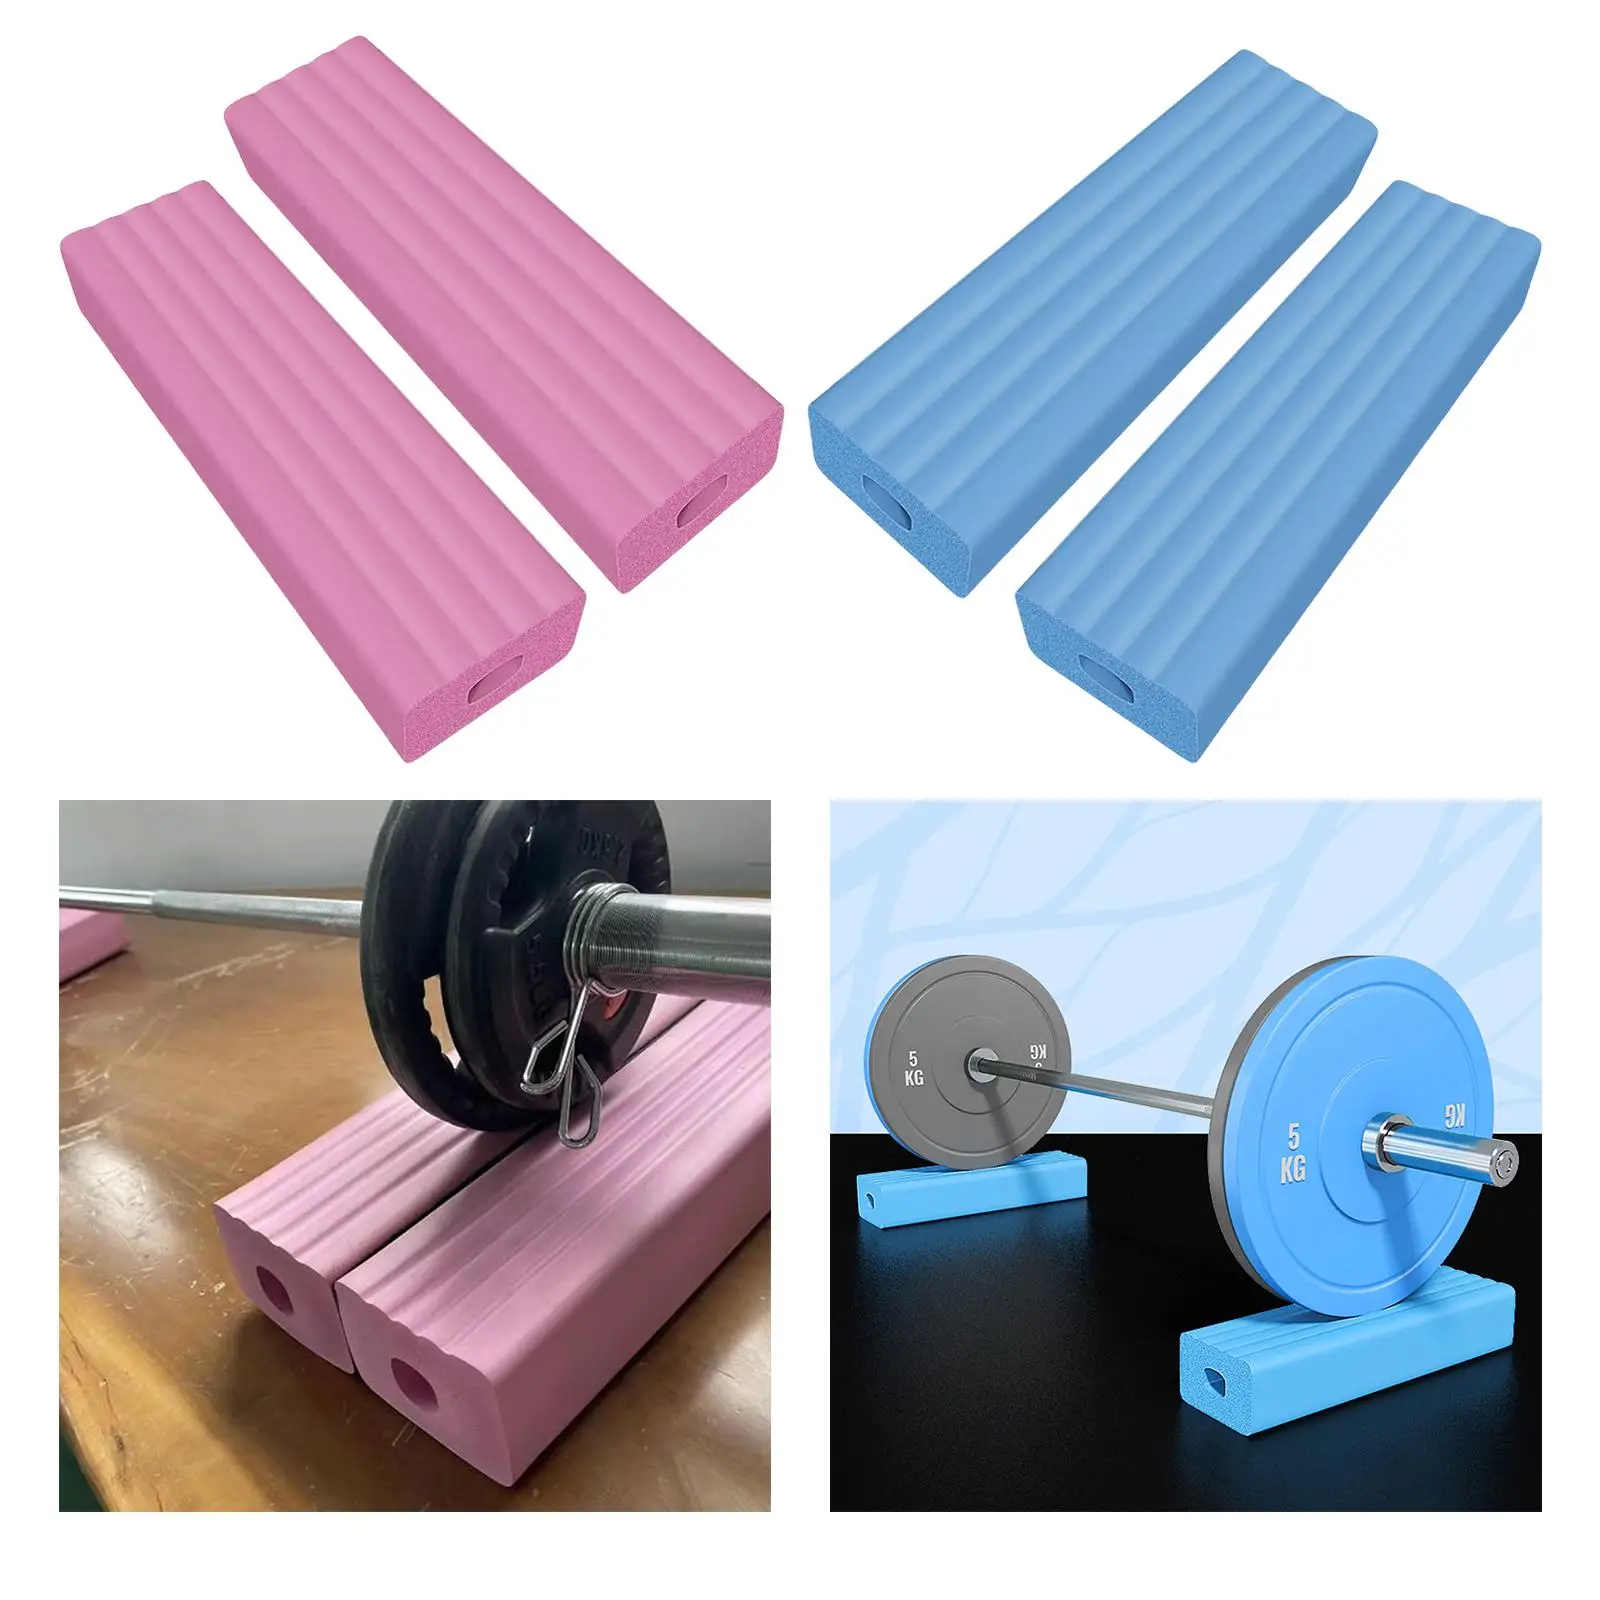 Dumbbell Cushion Noise Absorption for Home Office